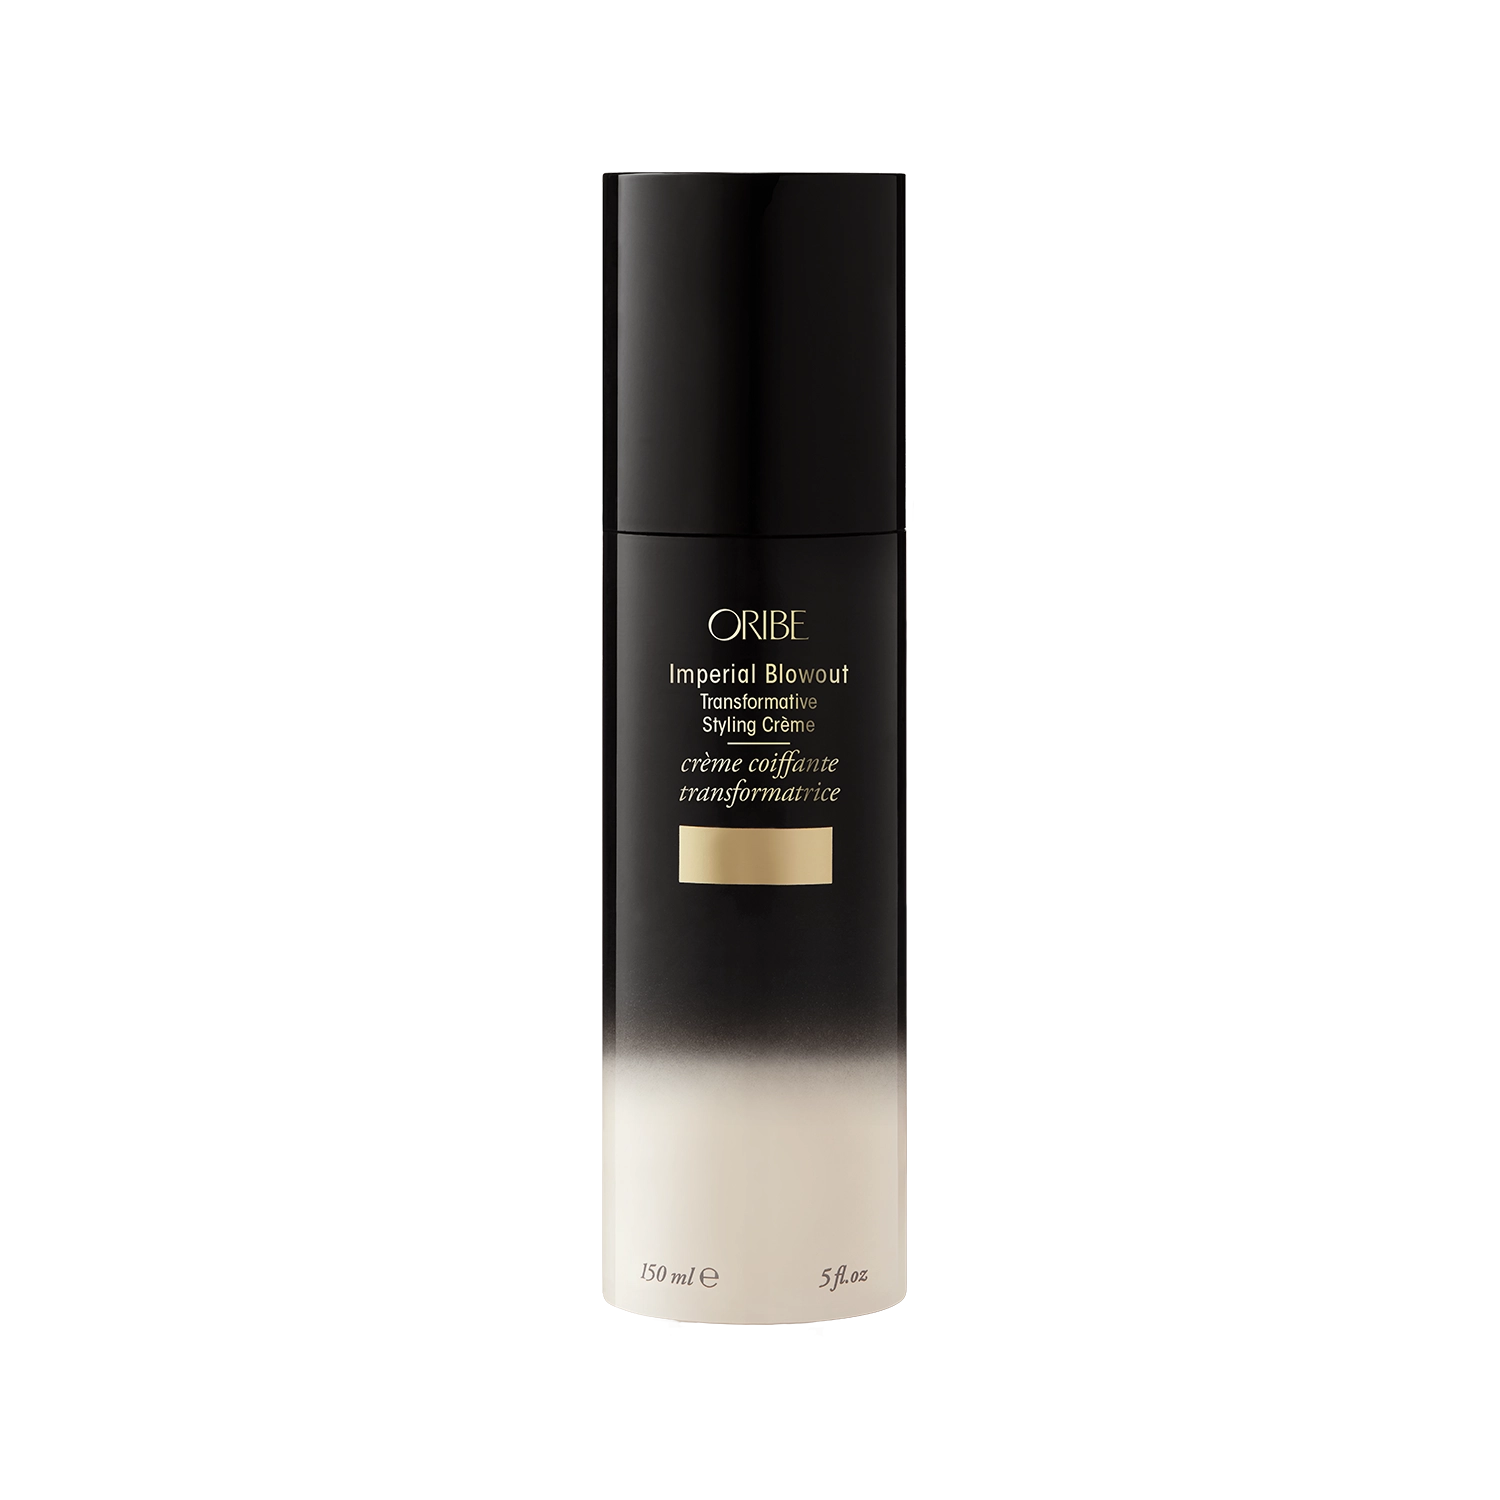 ORIBE - Impérial Blowout Transforming Styling Cream (150ml)